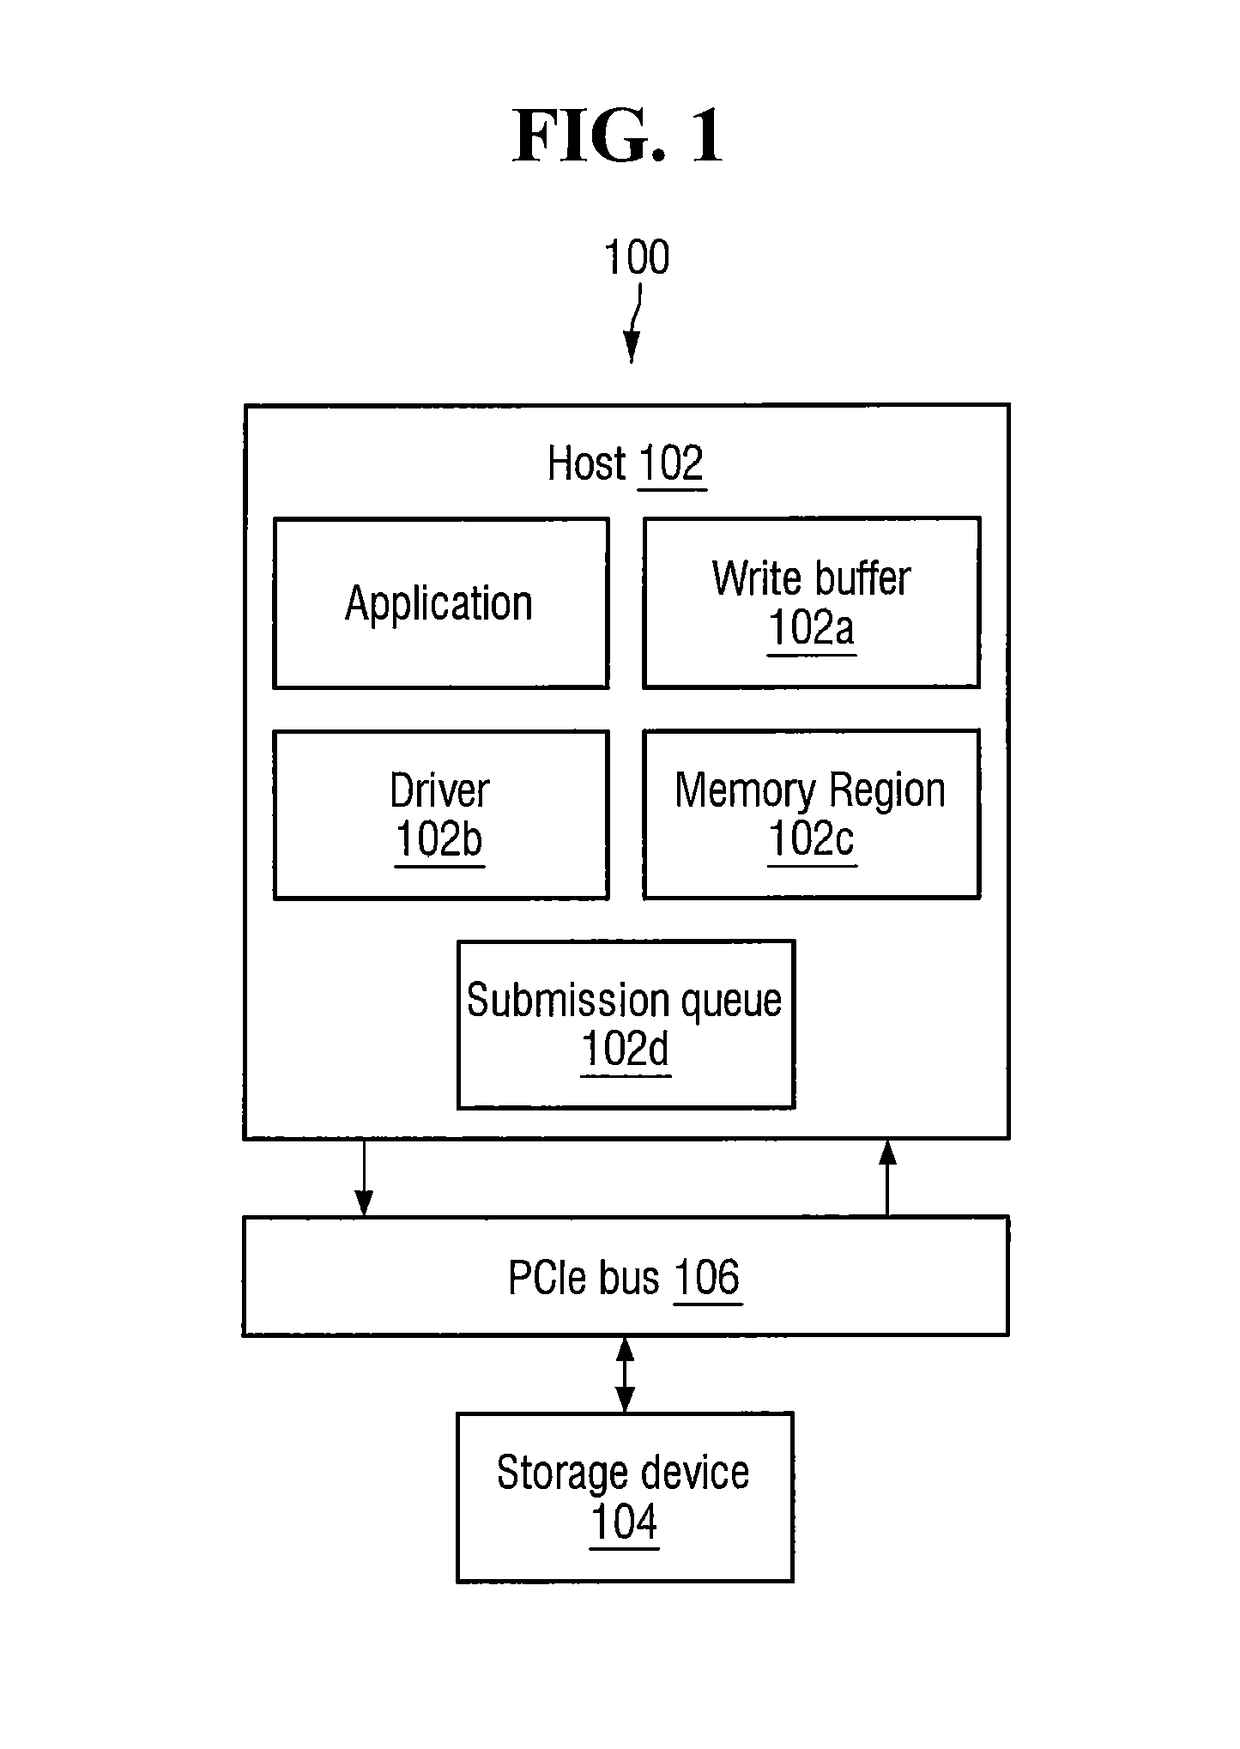 Method of achieving low write latency in a data storage system